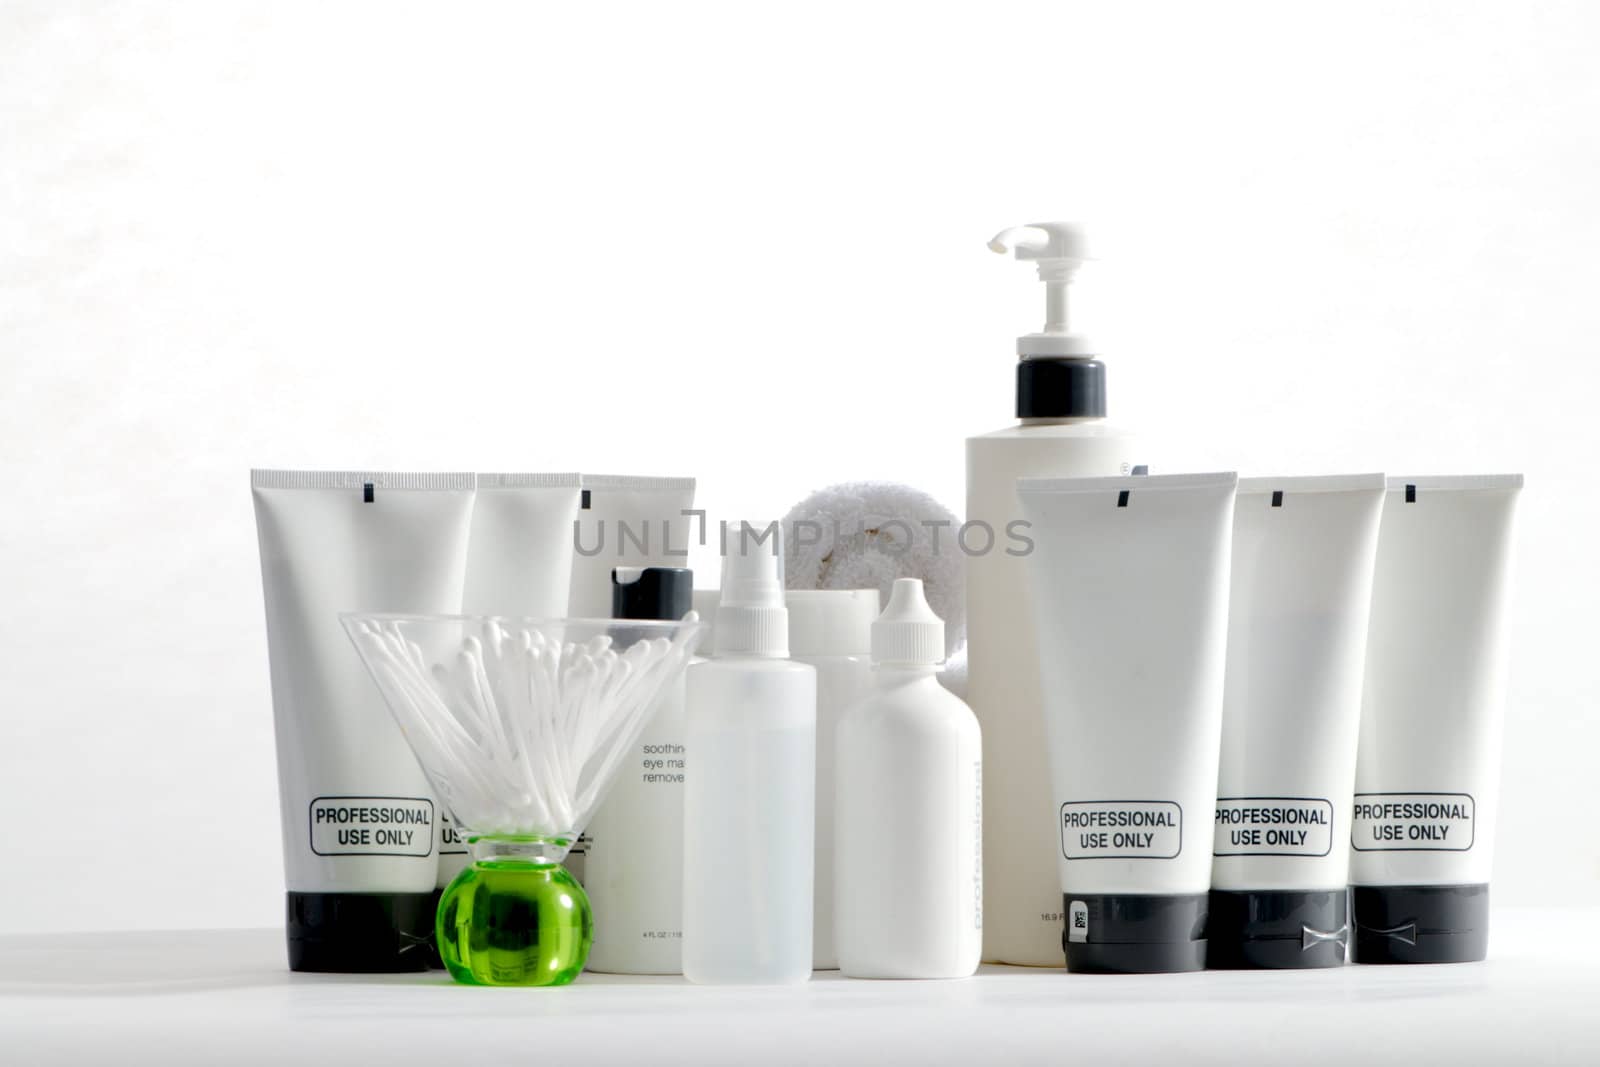 Various professional spa products arranged on a white background